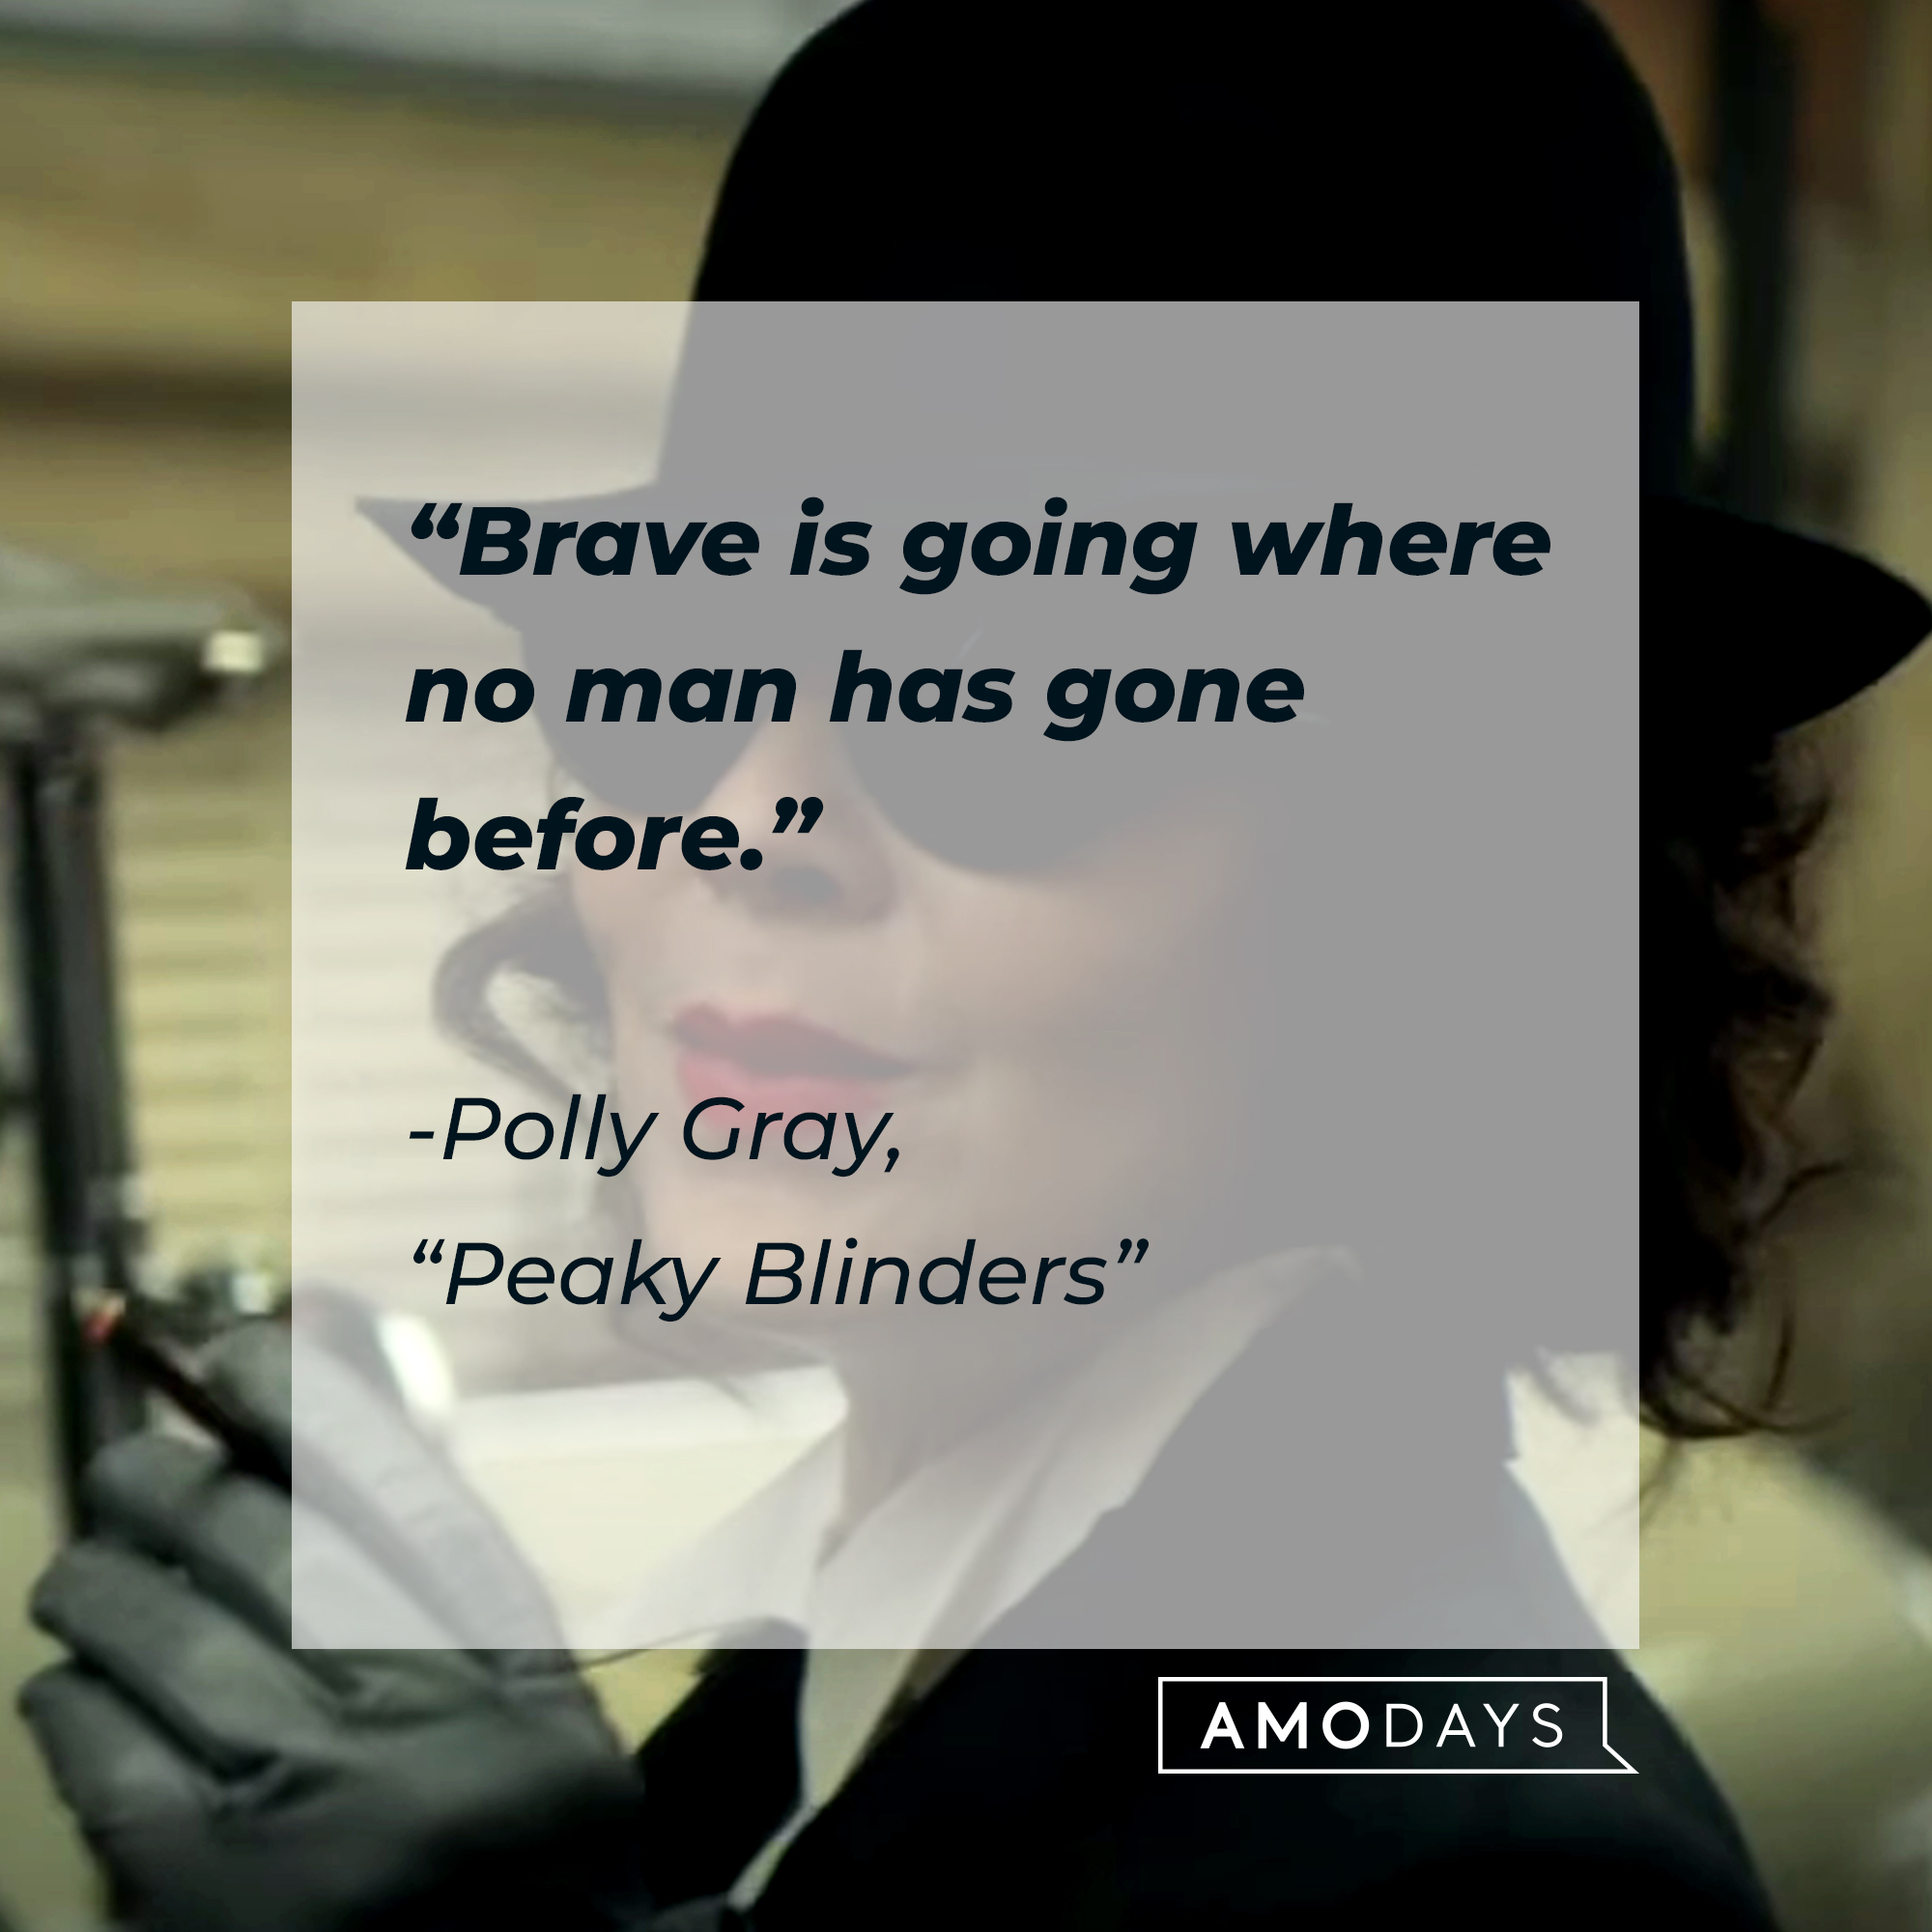 Polly Gray’s quote from “Peaky Blinders”: “Brave is going where no man has gone before.” | Source: Youtube.com/BBC